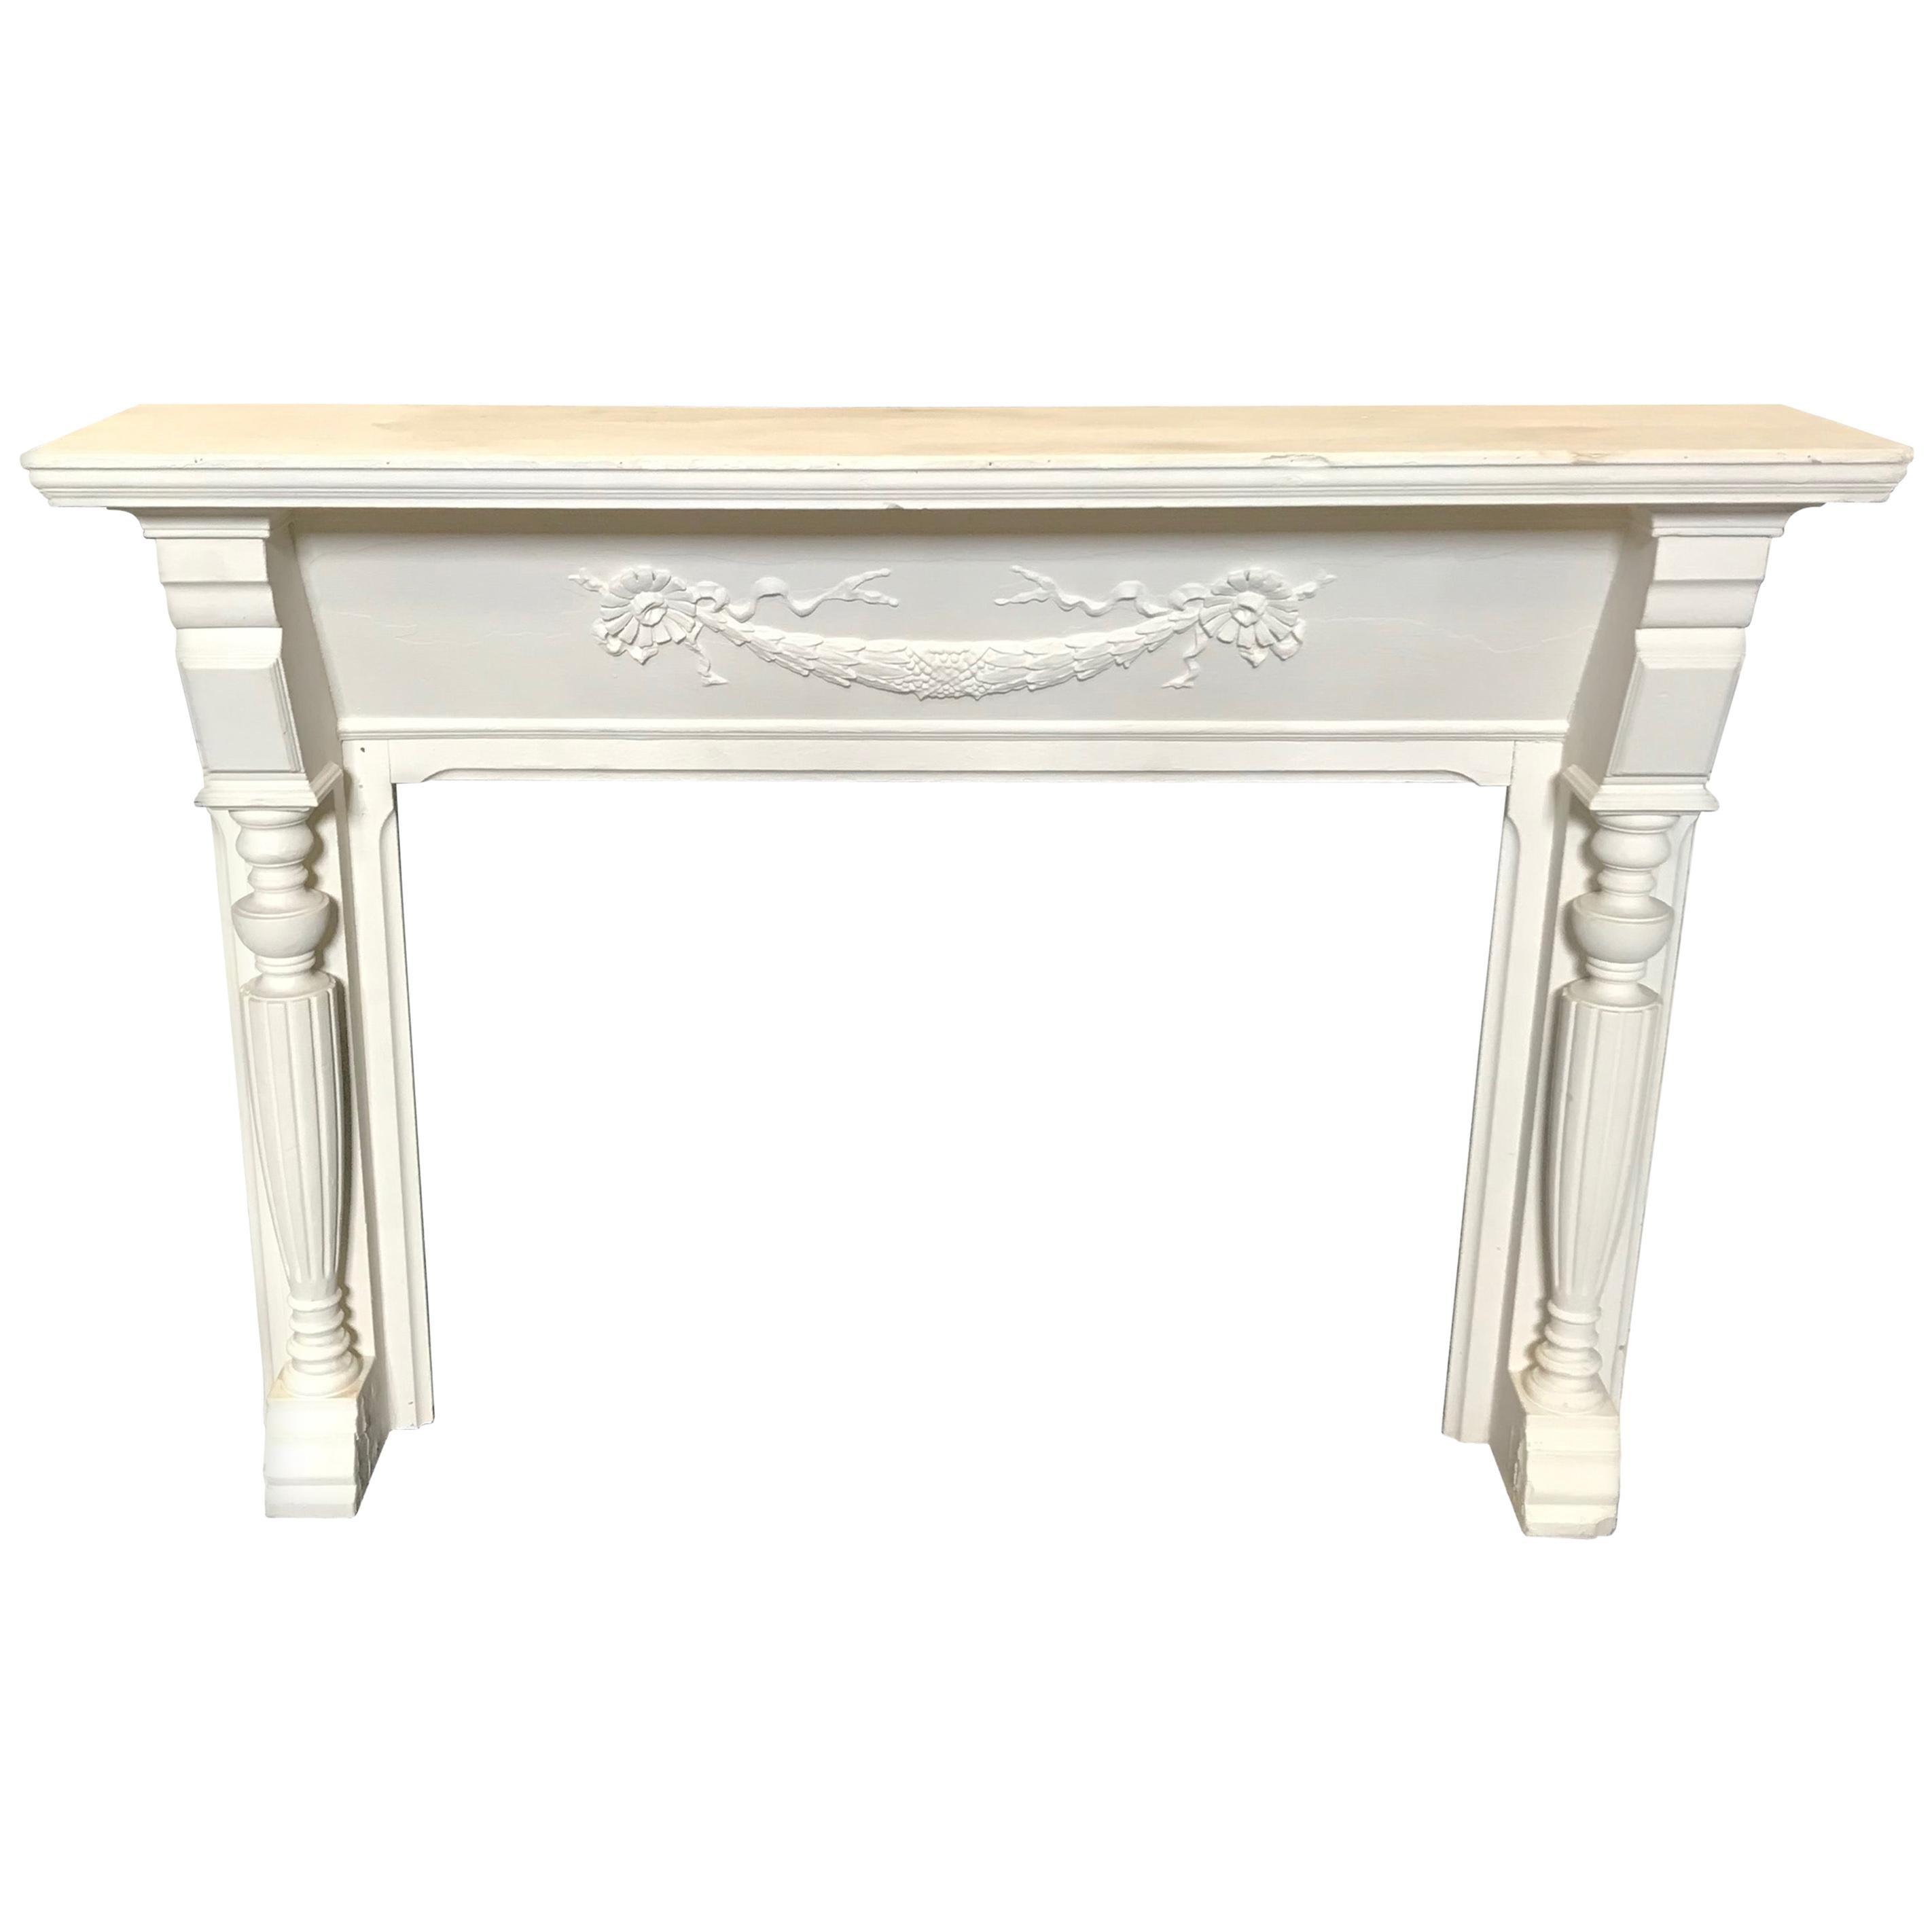 Stately 19th Century Federal Carved White Fireplace Mantel with Columns